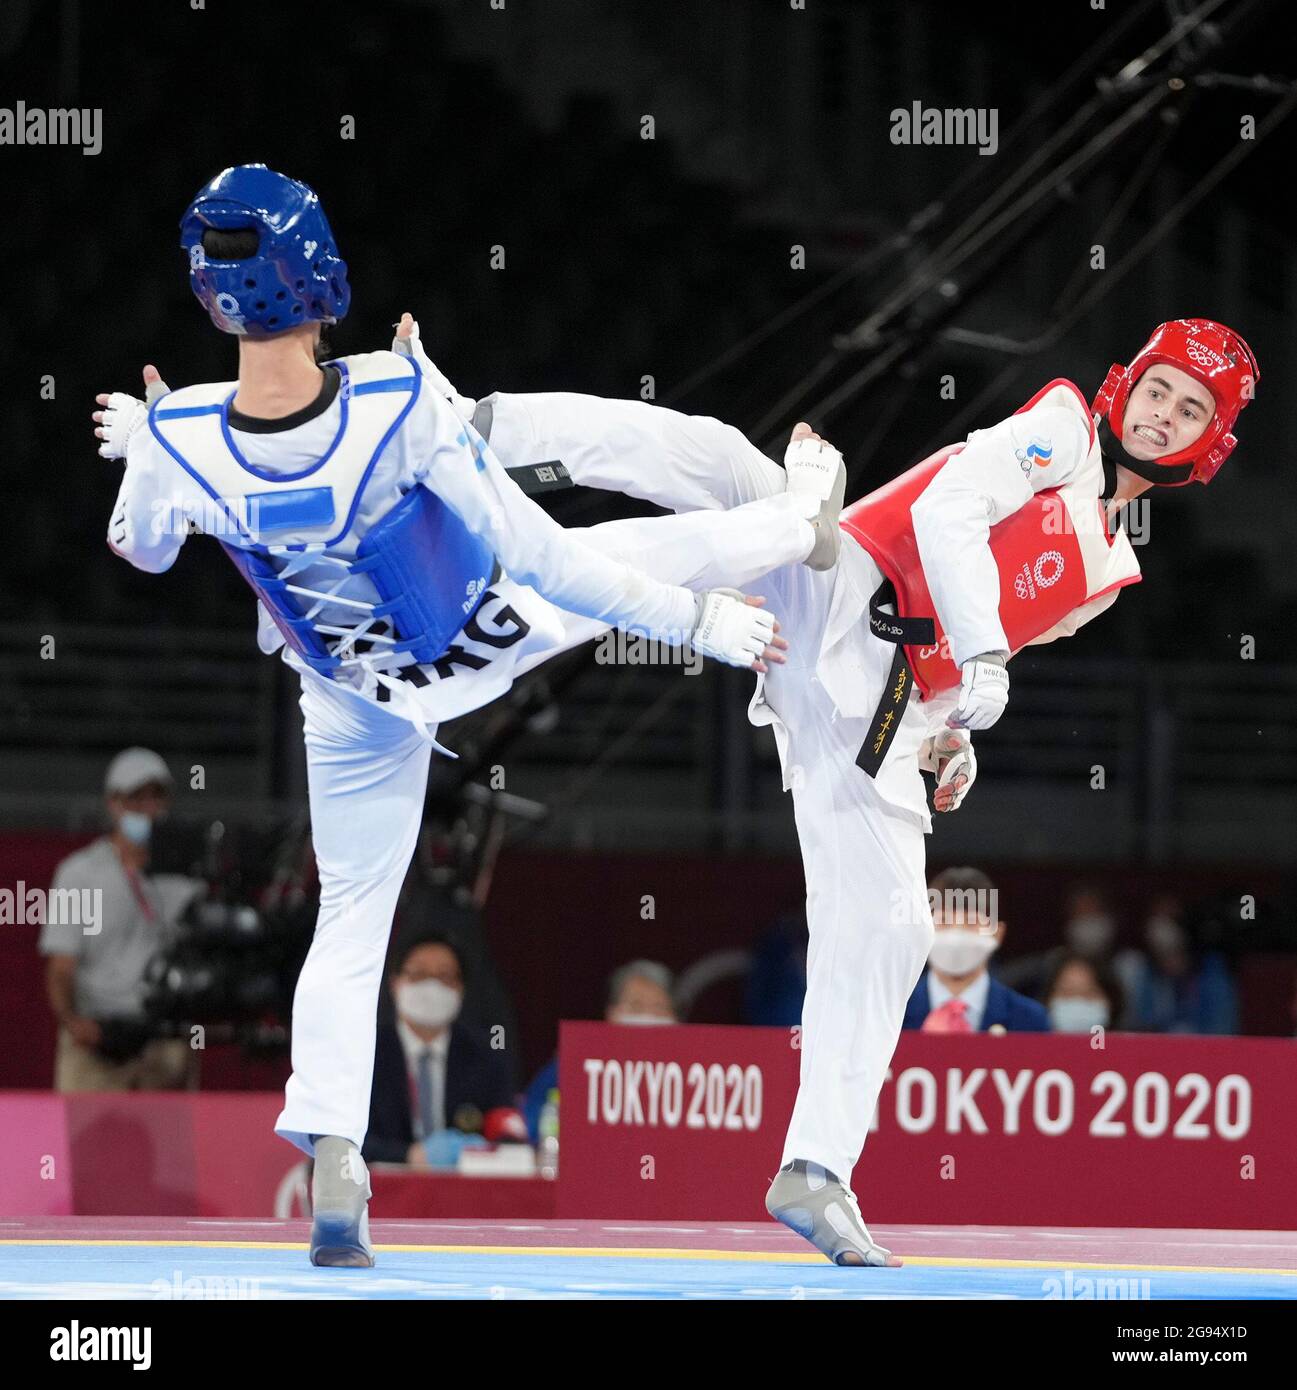 Tokyo, Japan. 24th July, 2021. Mikhail Artamonov (R) of the Russian Olympic Committee (ROC) competes against Lucas Lautaro Guzman of Argentina during the men's 58kg taekwondo bronze medal match at the Tokyo 2020 Olympic Games in Tokyo, Japan, July 24, 2021. Credit: Wang Yuguo/Xinhua/Alamy Live News Stock Photo